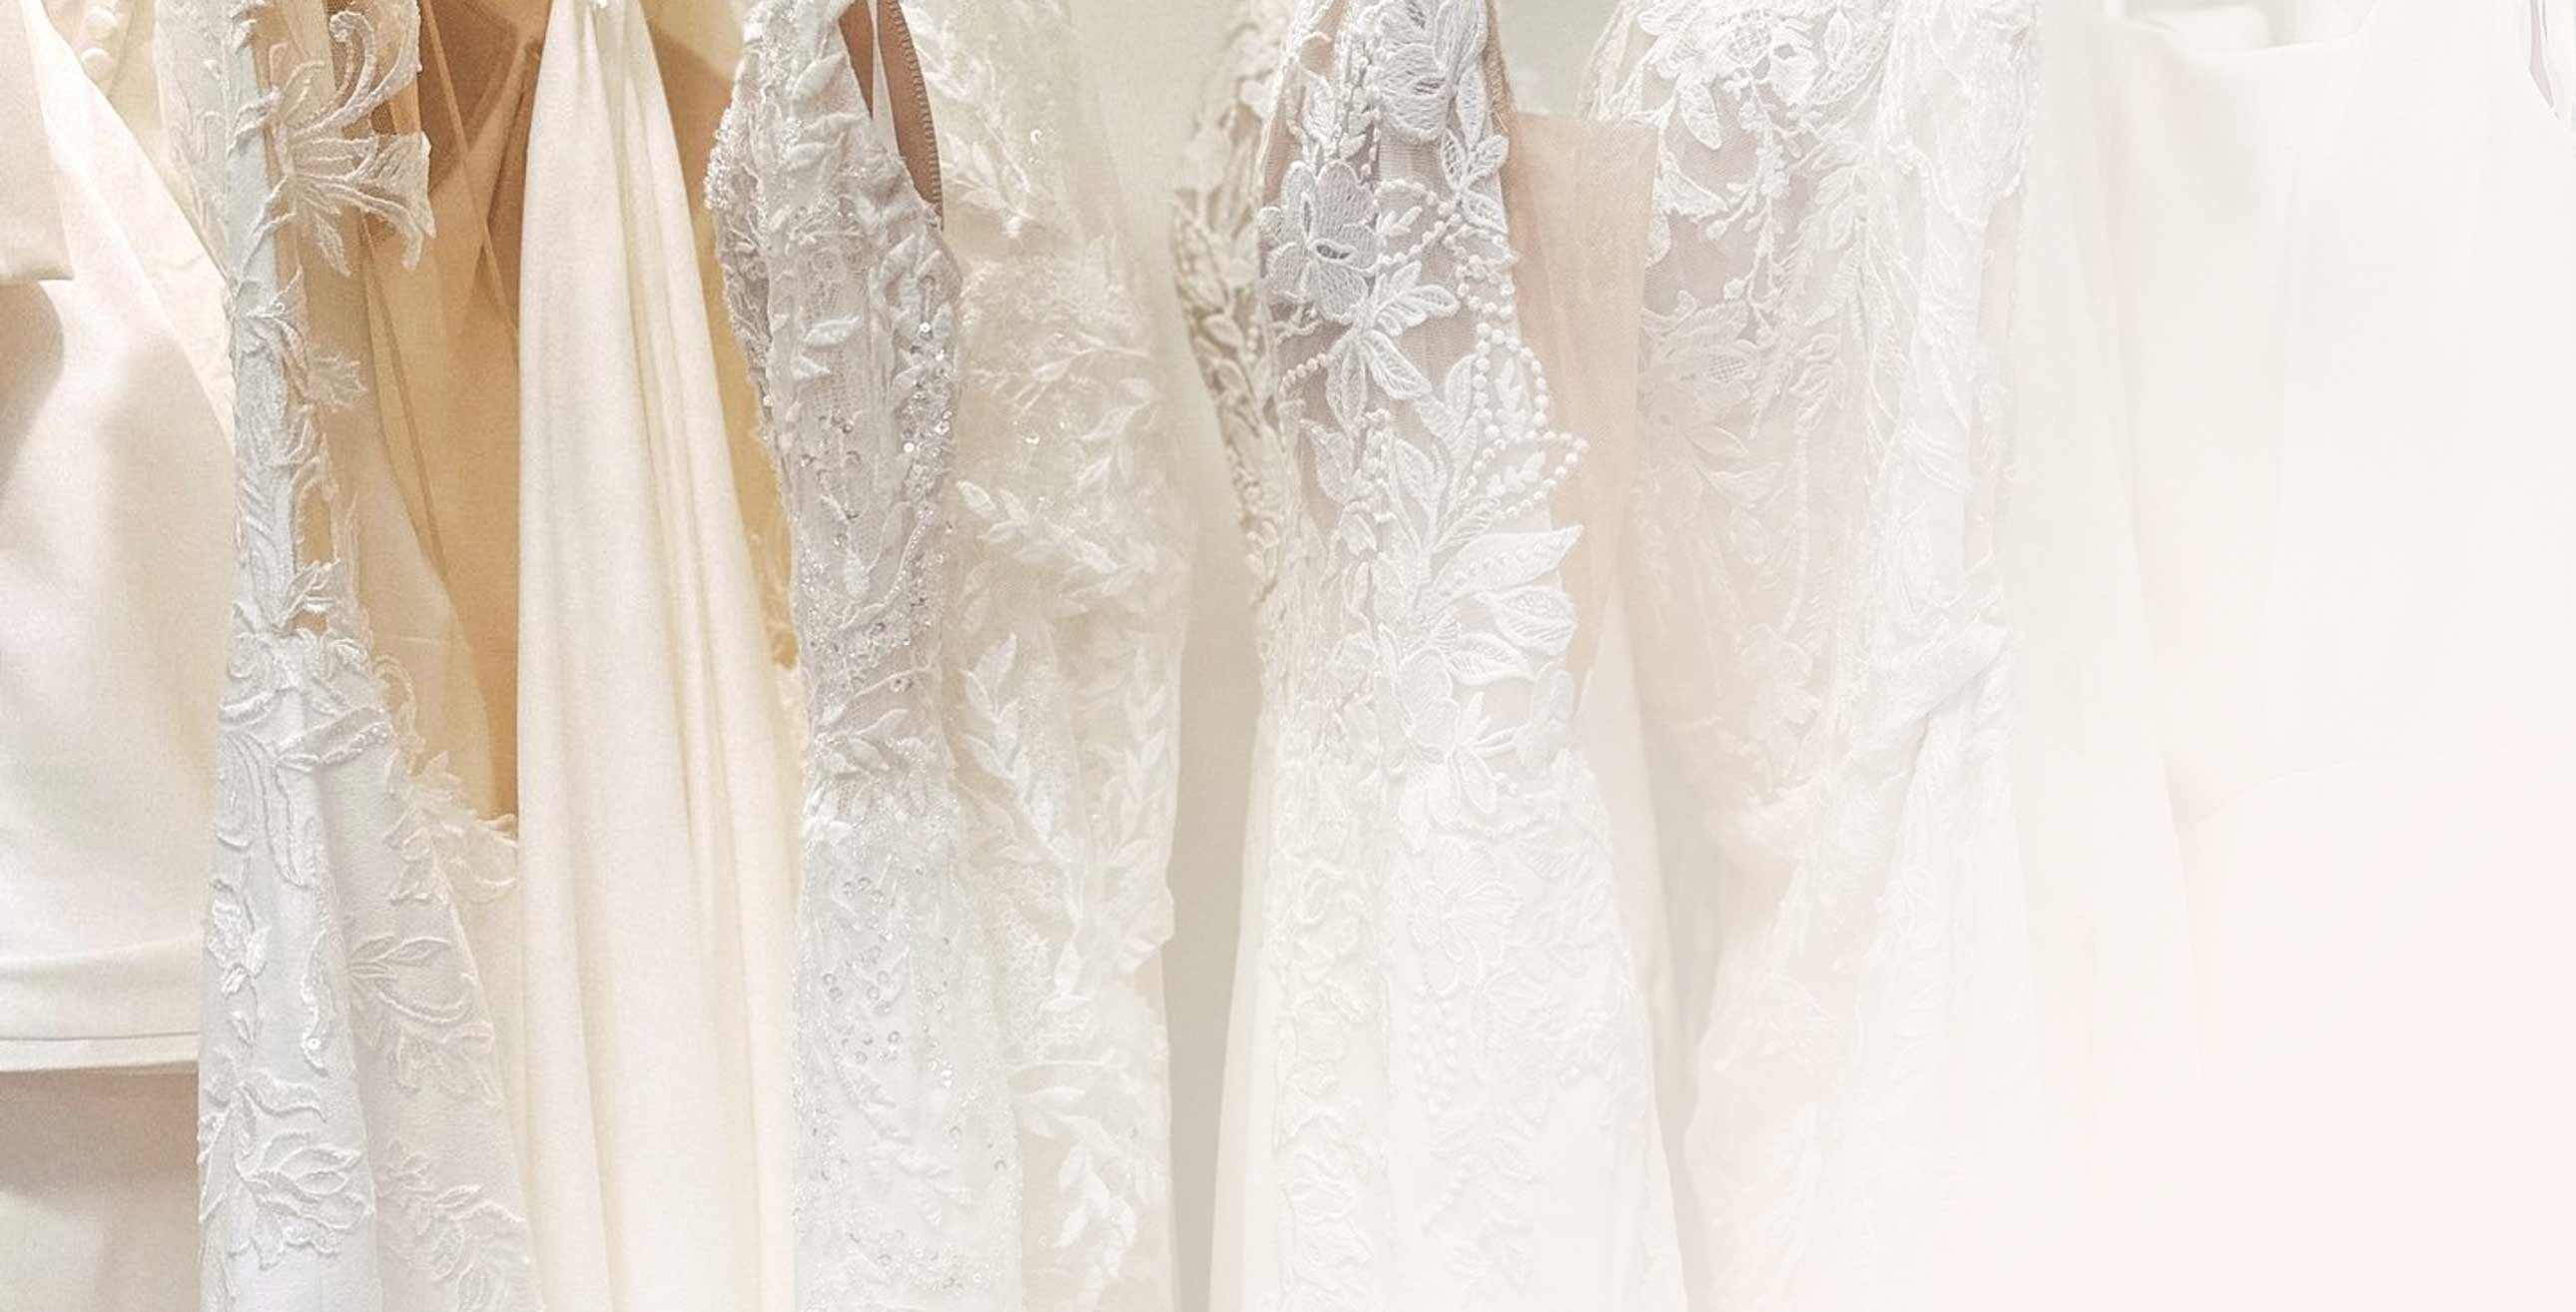 Photo of the bridal gowns - Desktop Image